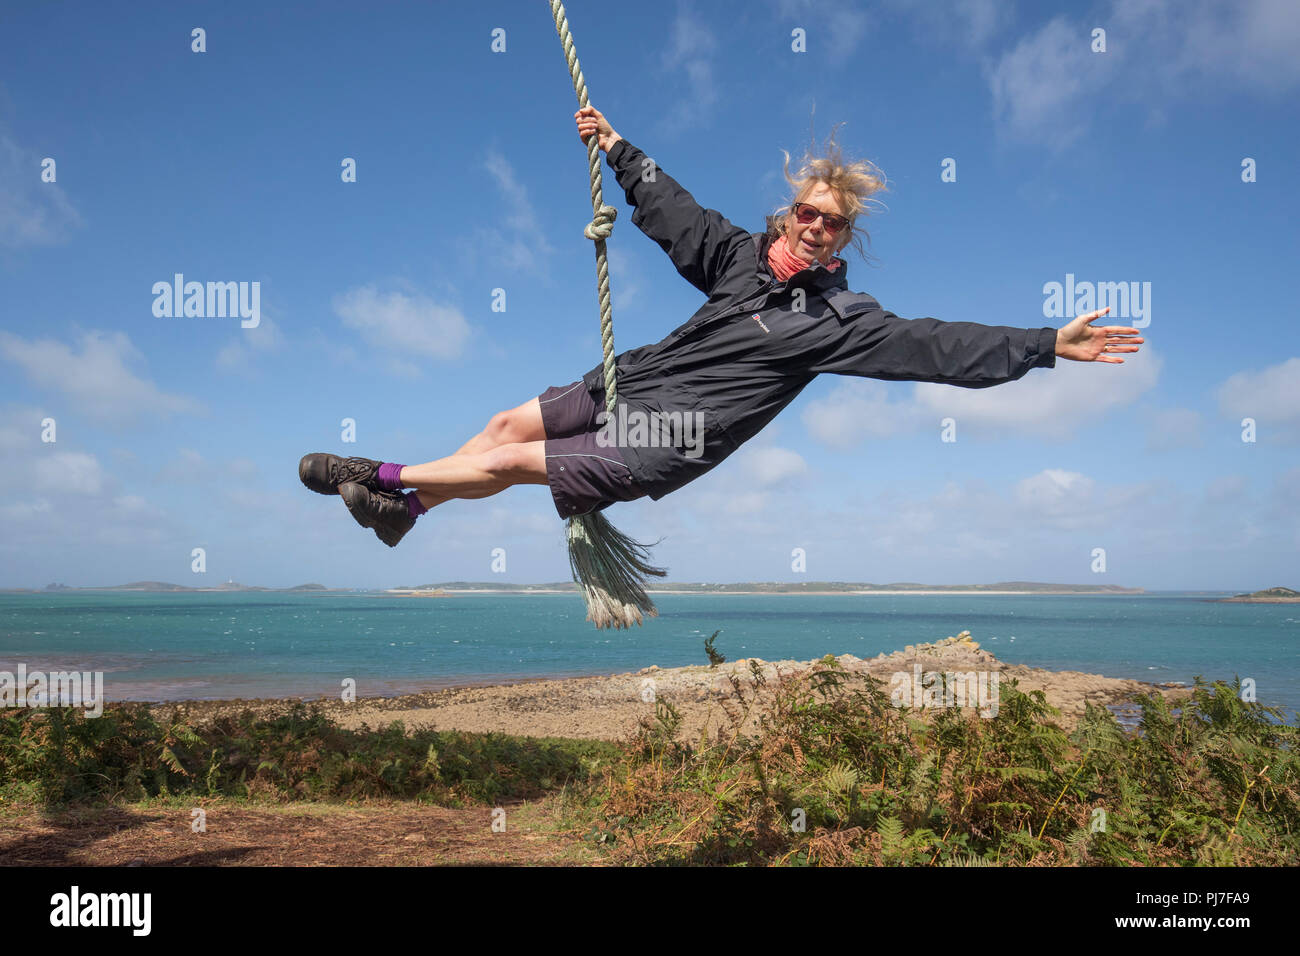 Woman on Rope Swing ; St Mary's, Îles Scilly ; UK Banque D'Images